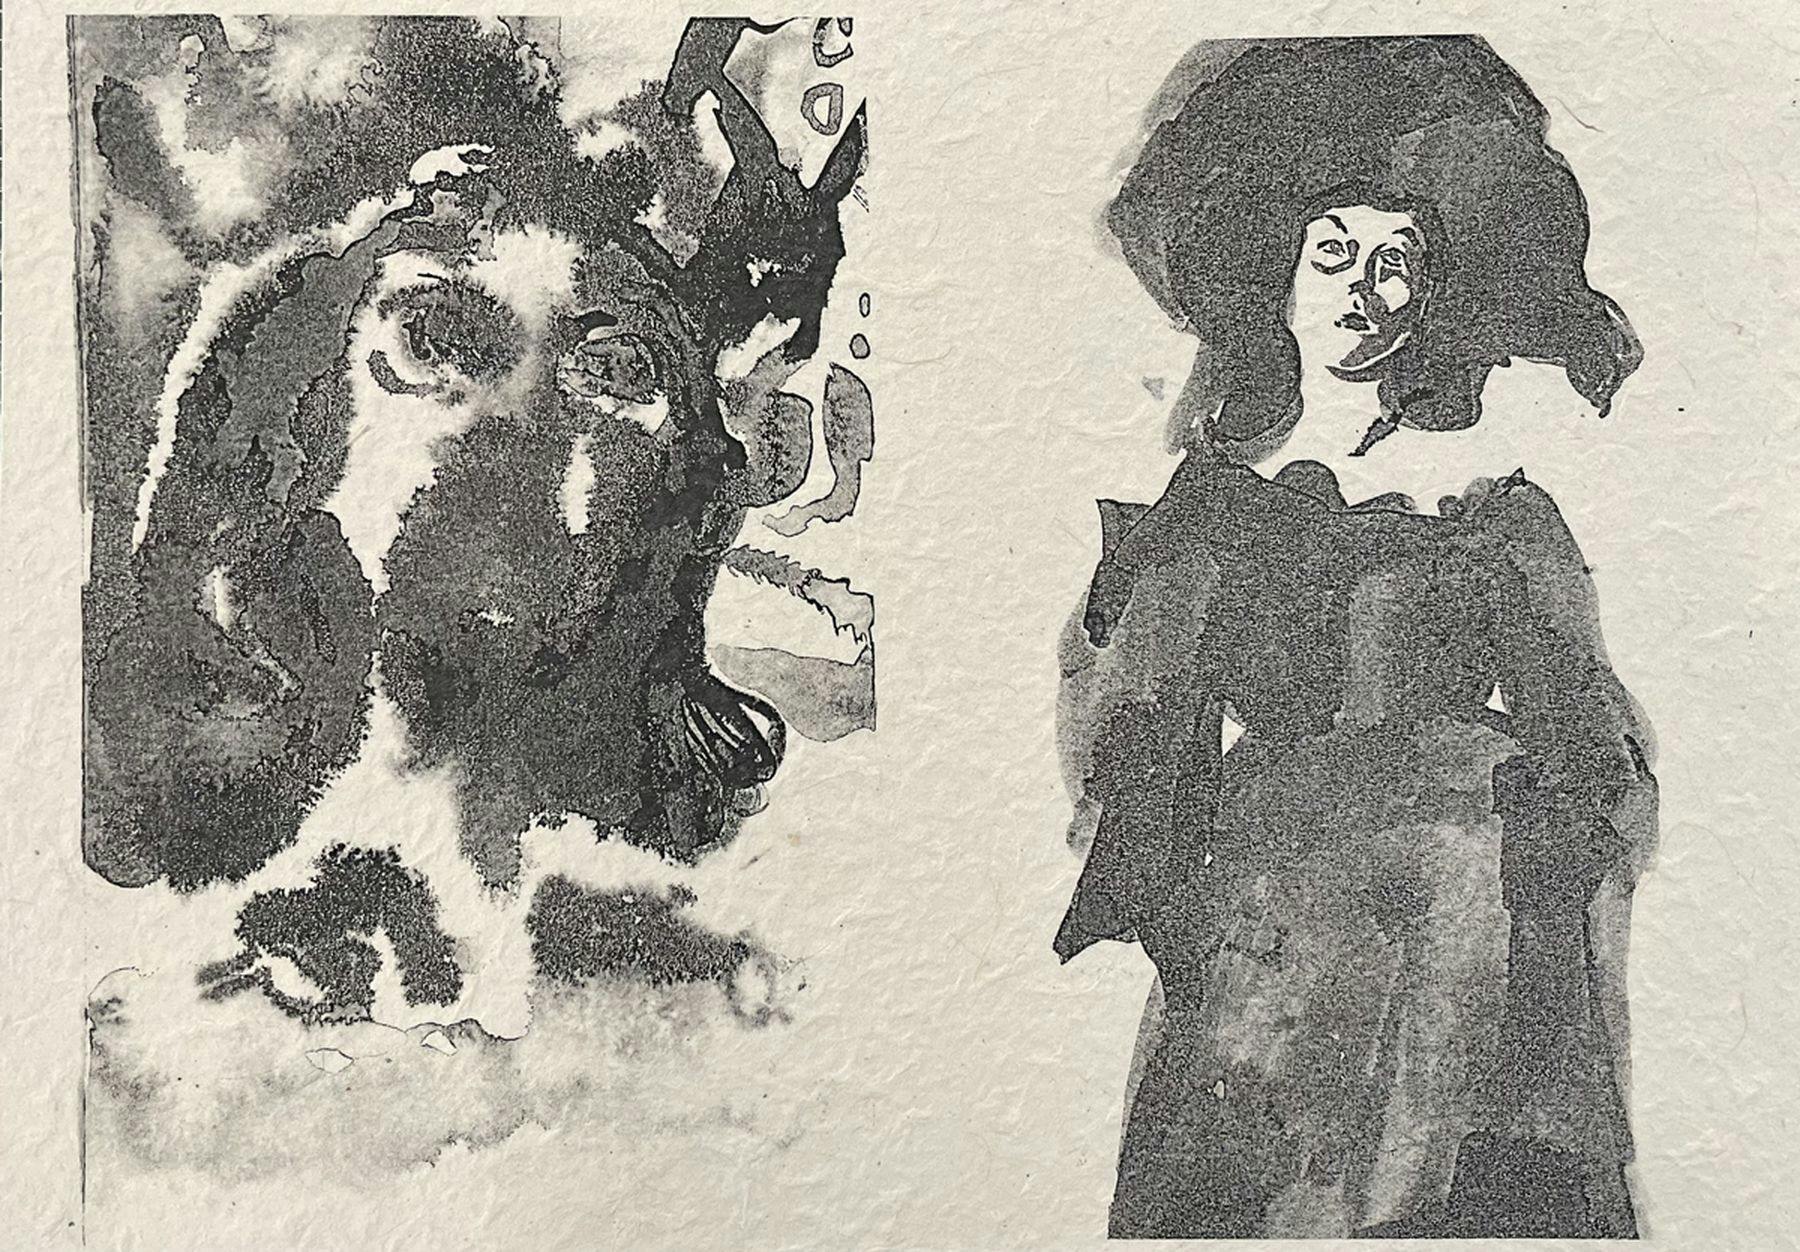 Two painted black illustrations side by side, one of a dog with long ears and the second of a person wearing a hat and a long-sleeved dress. The paintings are on textured paper in a smudged black paint.